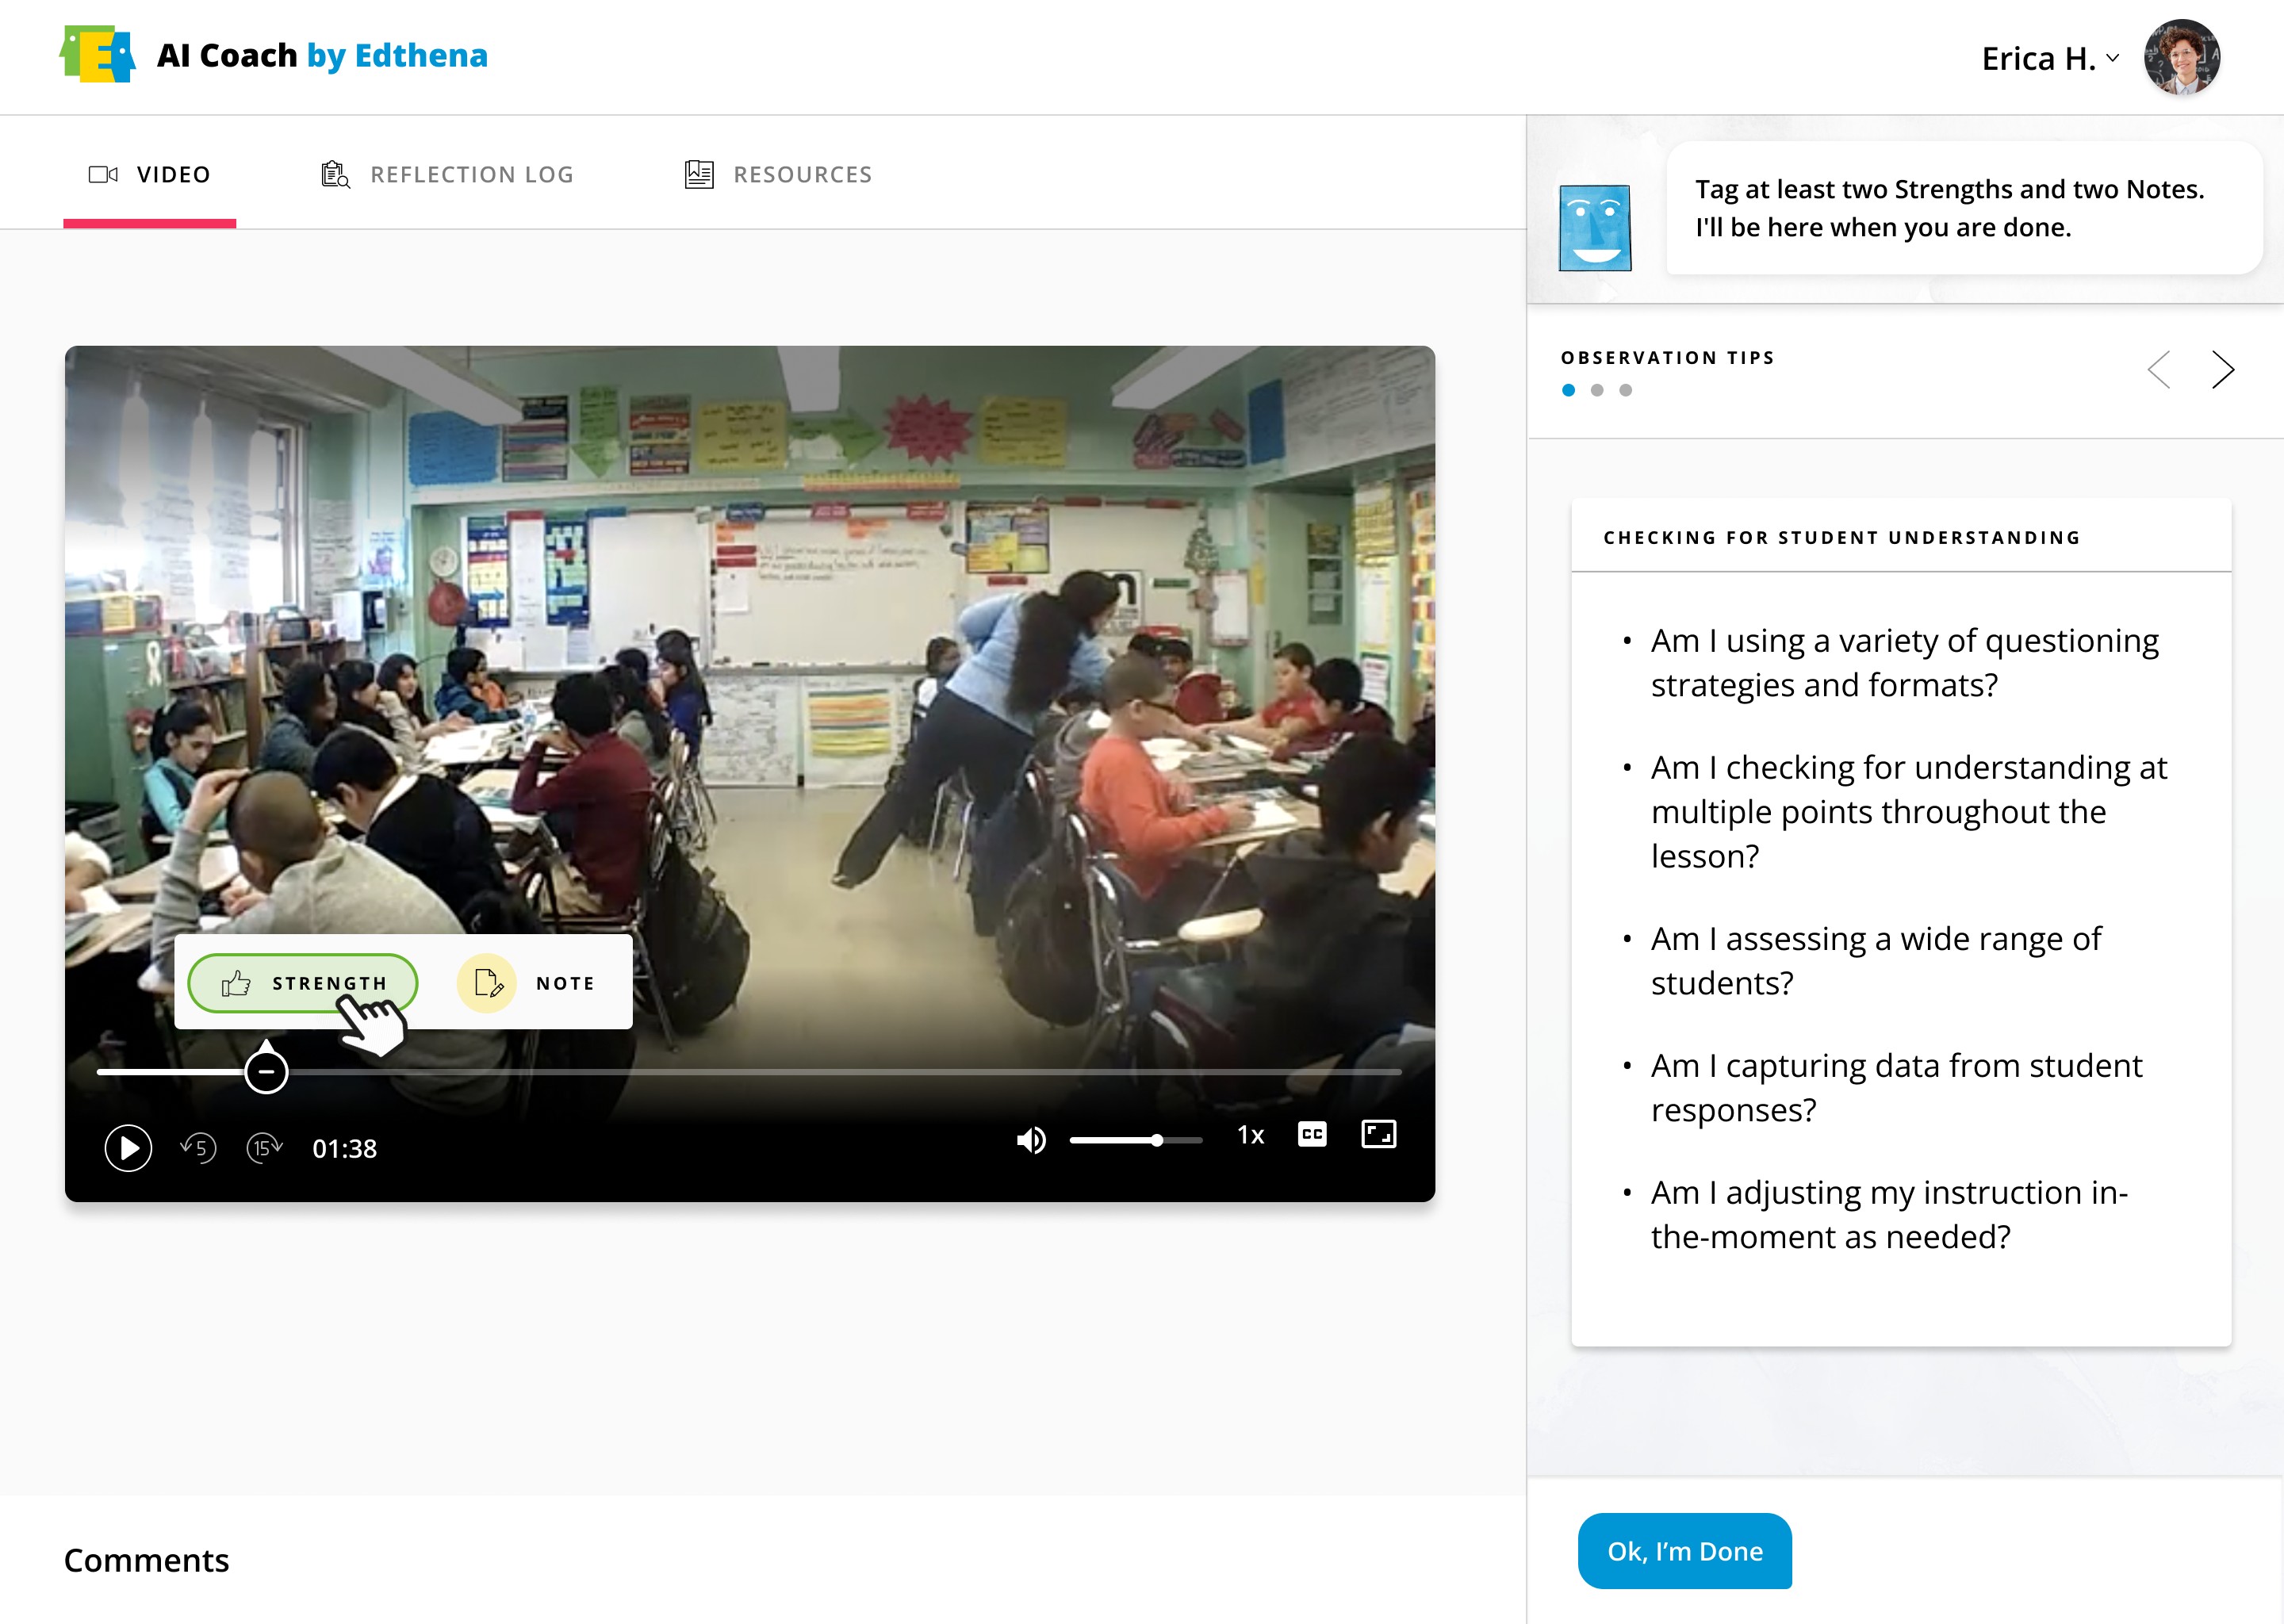 Within the AI Coach platform, teachers analyze videos of their own teaching. The platform customizes aspects of the experience, like the Observation Tips (pictured) related to teachers' goals.